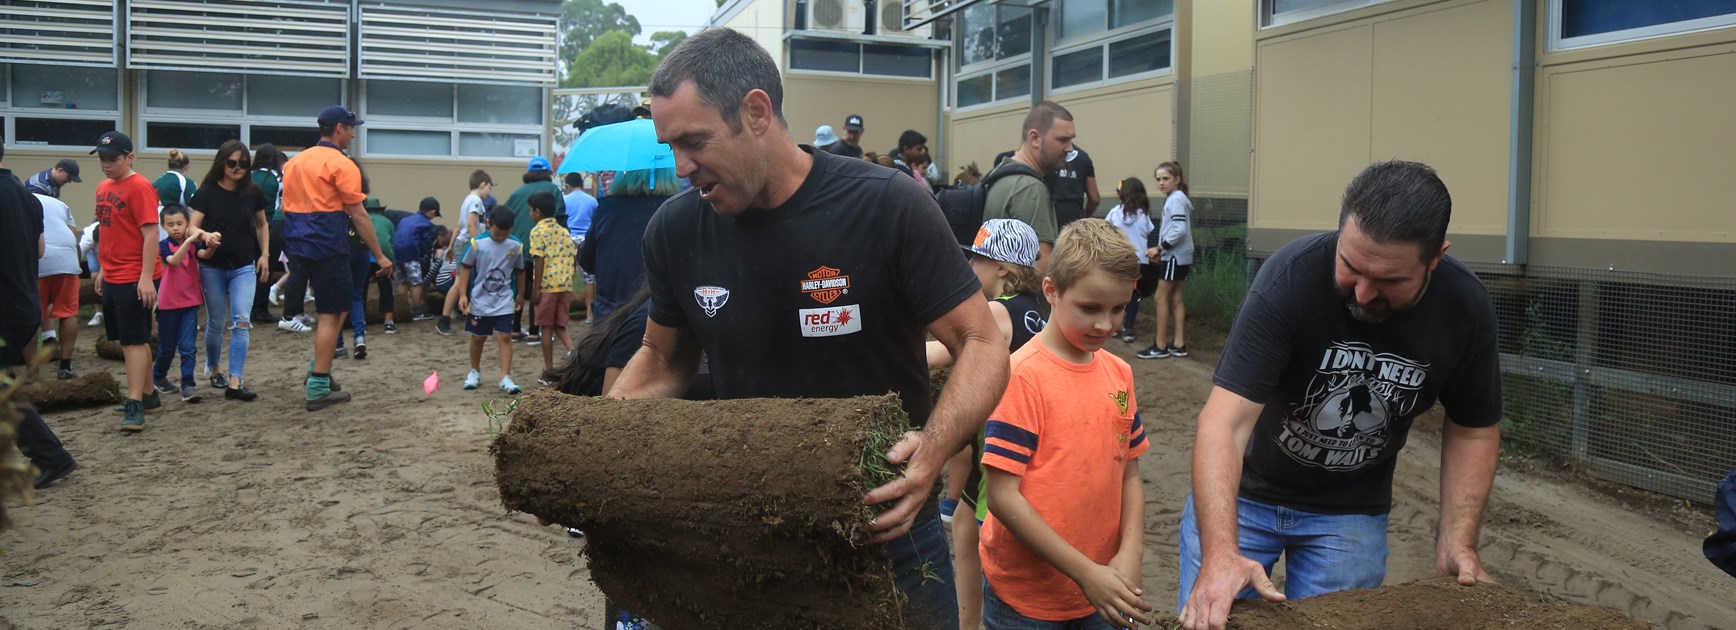 Fittler's 2019 Hogs tour finishes on high with field re-turf